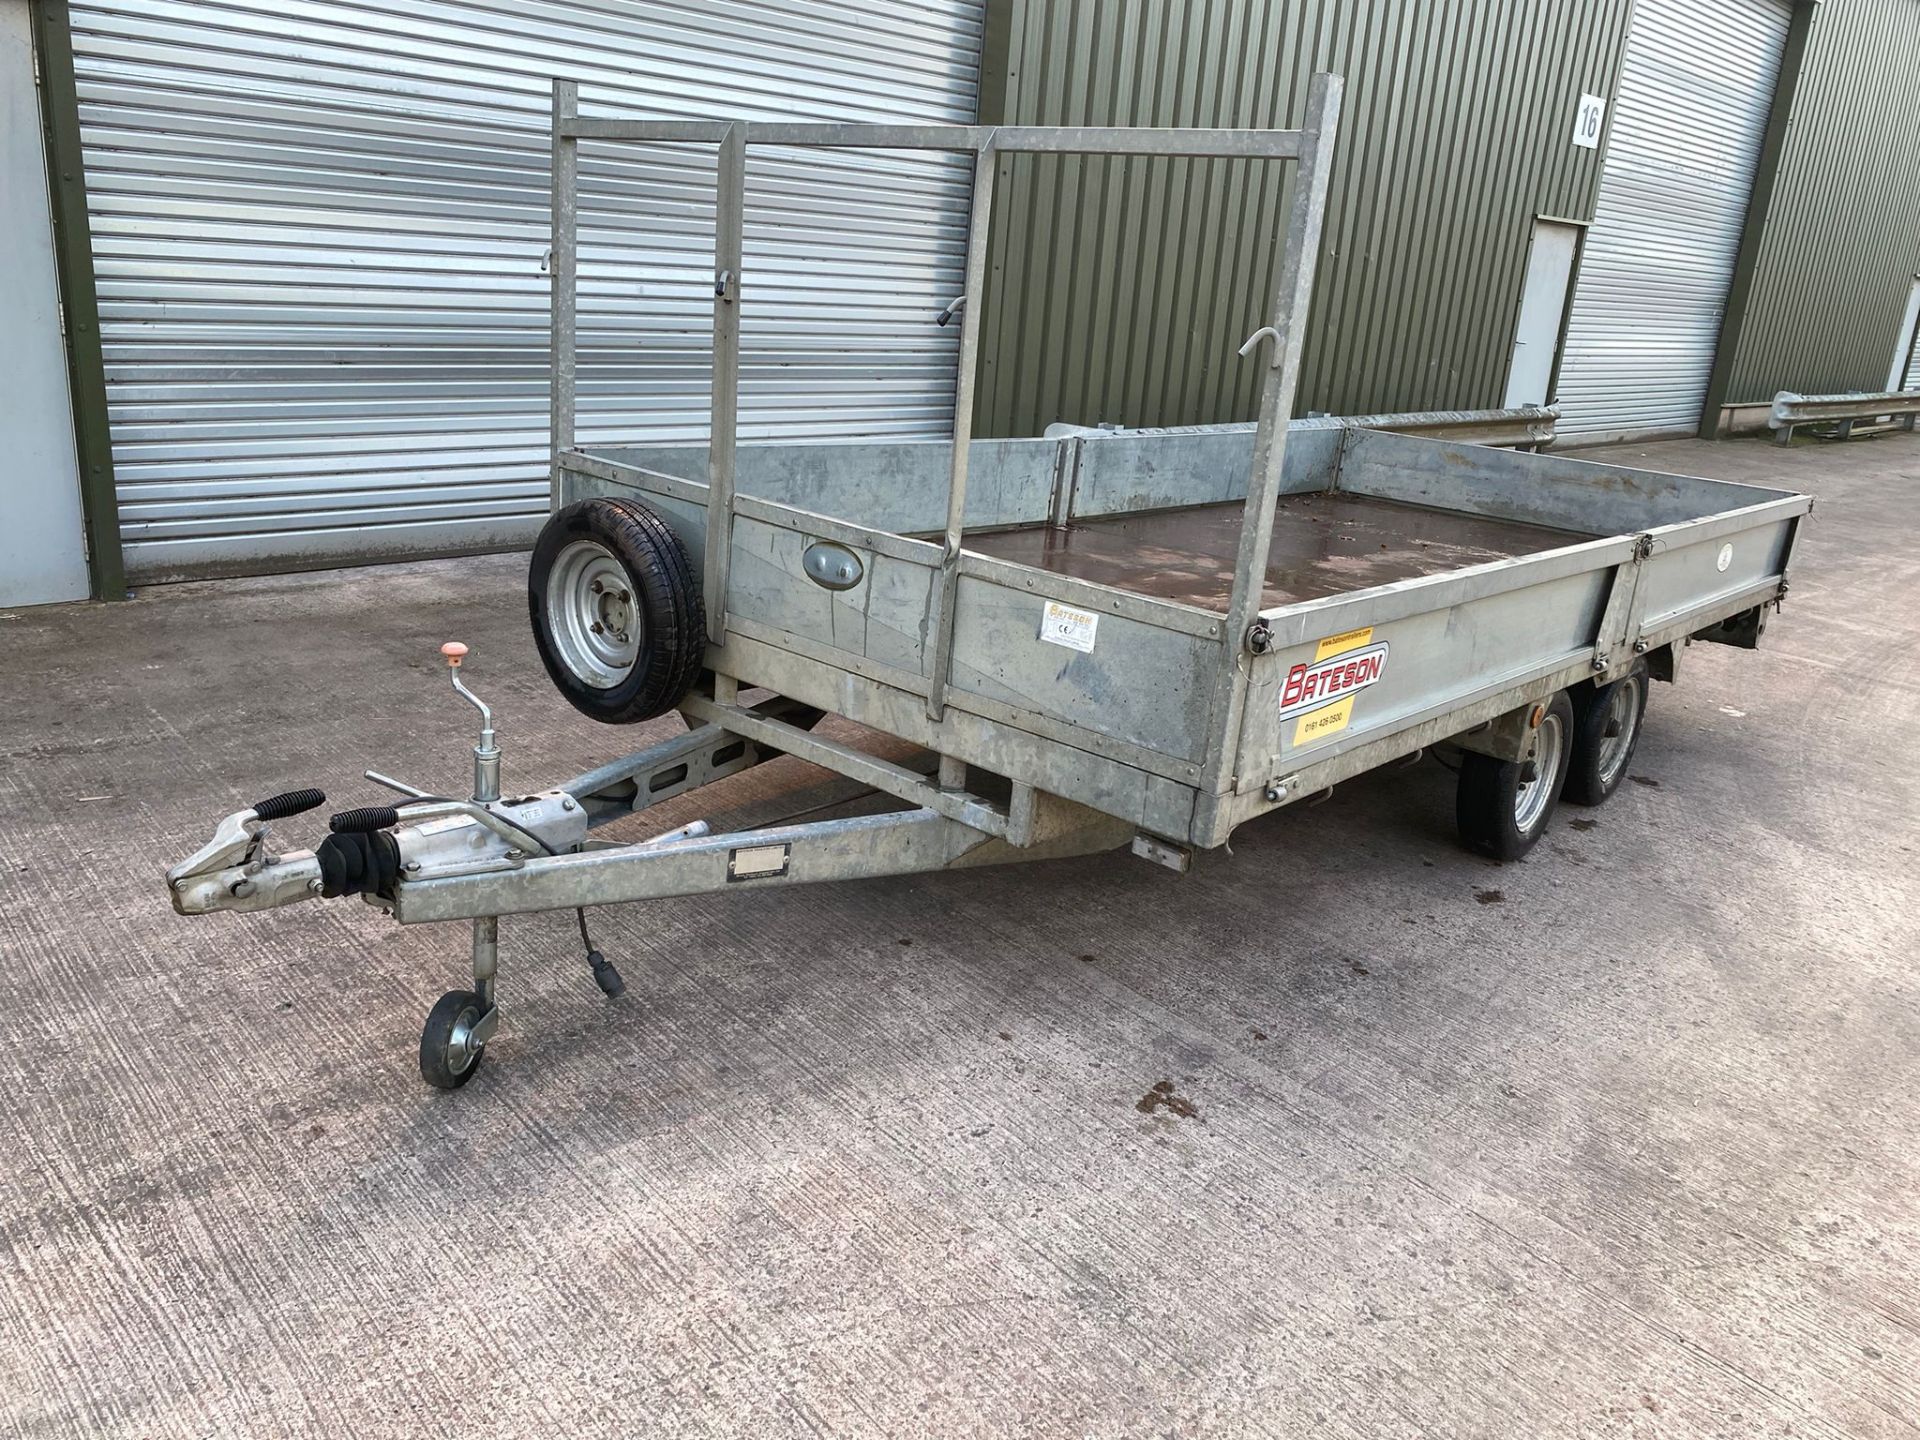 2007 BATESON TRAILER - IN VERY GOOD CONDITION WITH RAMPS, BRAKES ALL WORK, LIGHTS ALL WORK